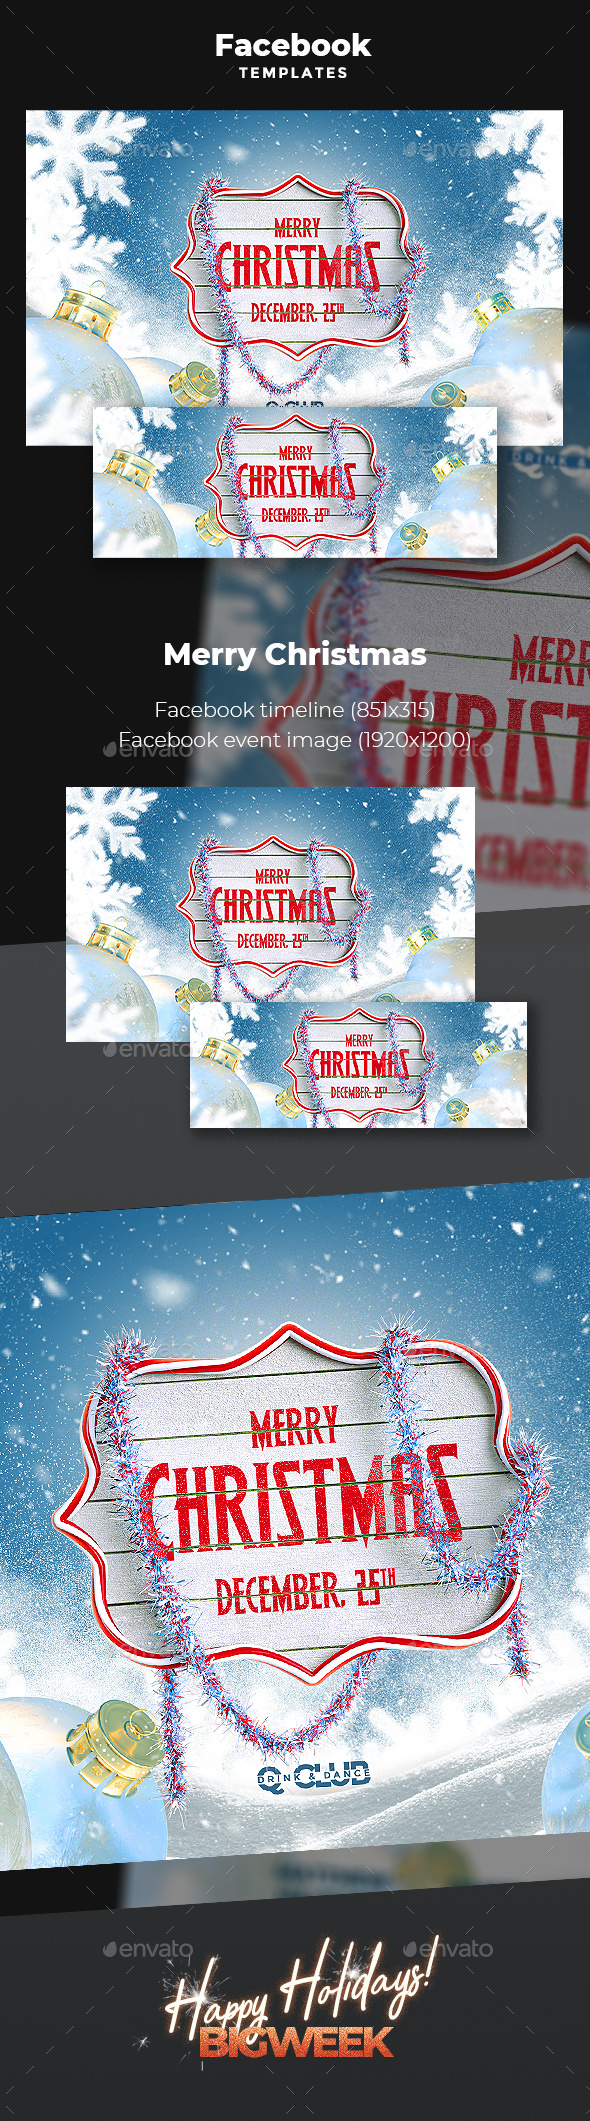 [DOWNLOAD]Christmas Facebook Cover